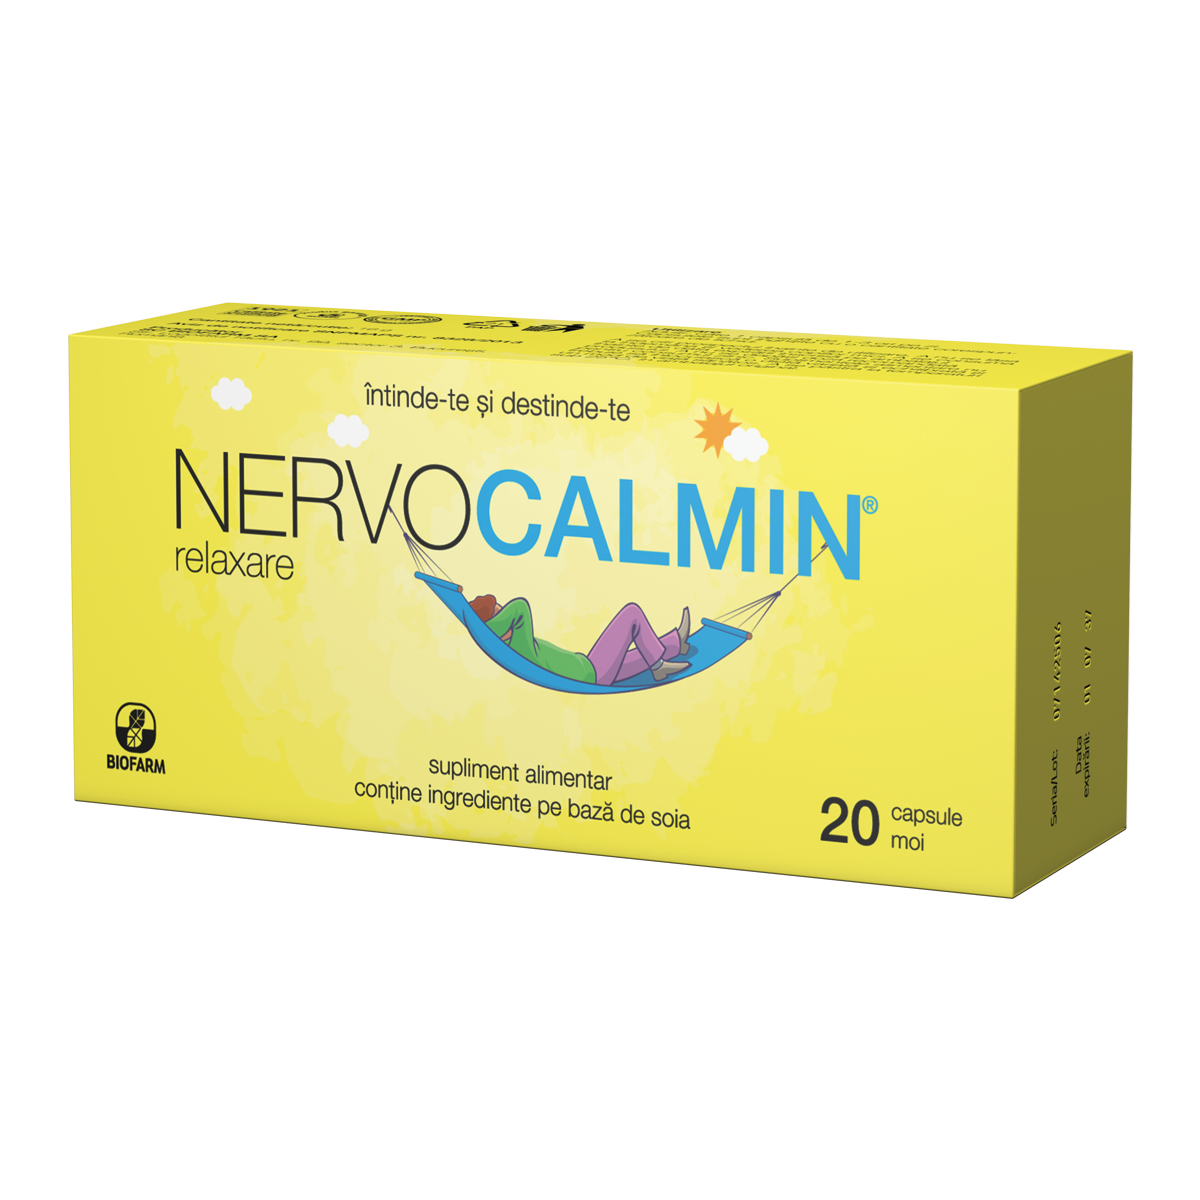 Somn si relaxare - NERVOCALMIN RELAXARE 20 CPS MOI, nordpharm.ro